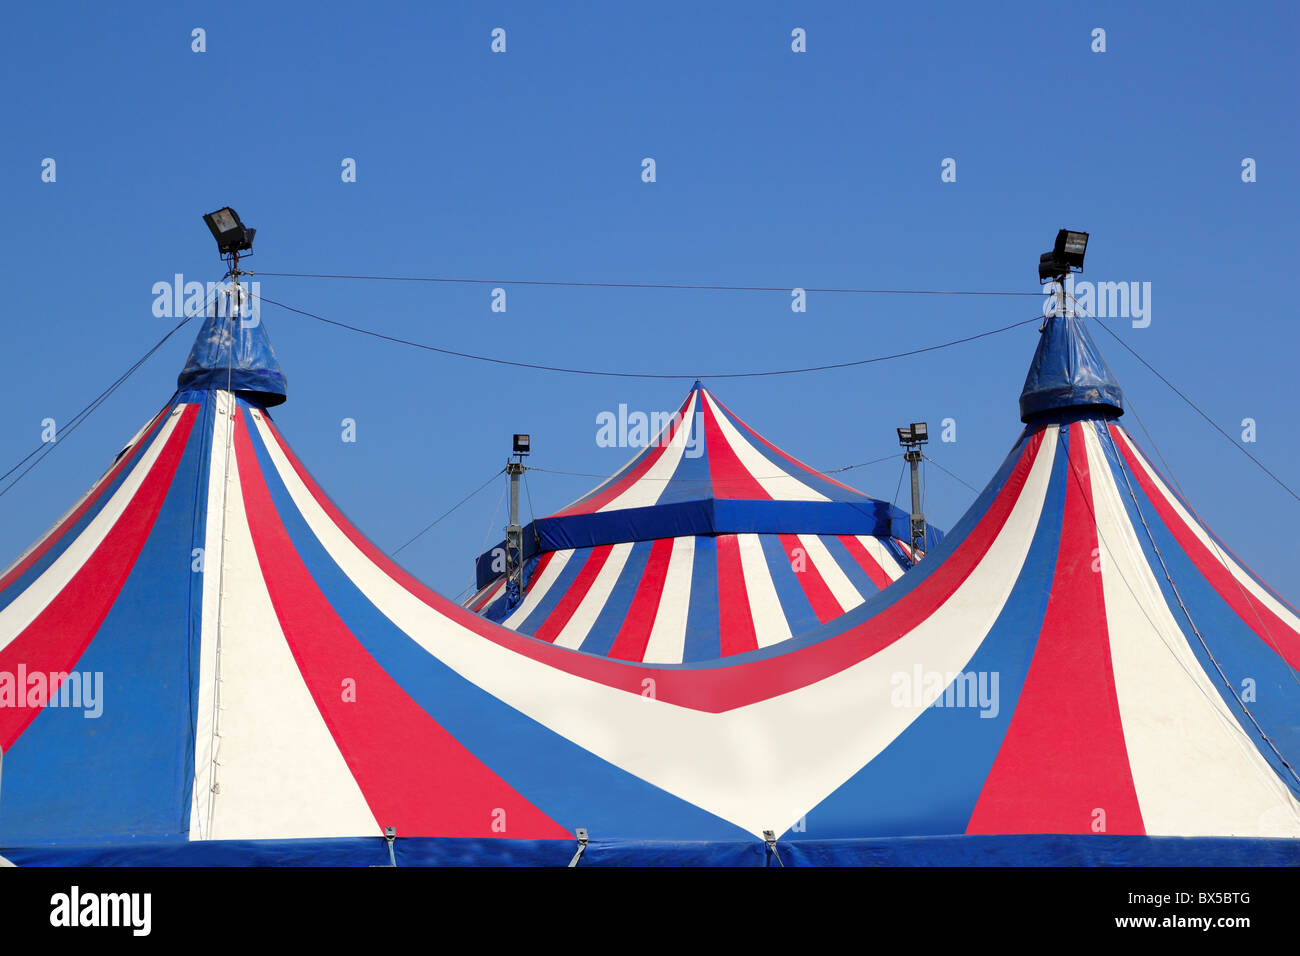 Circus tent under blue sky colorful stripes red white Stock Photo